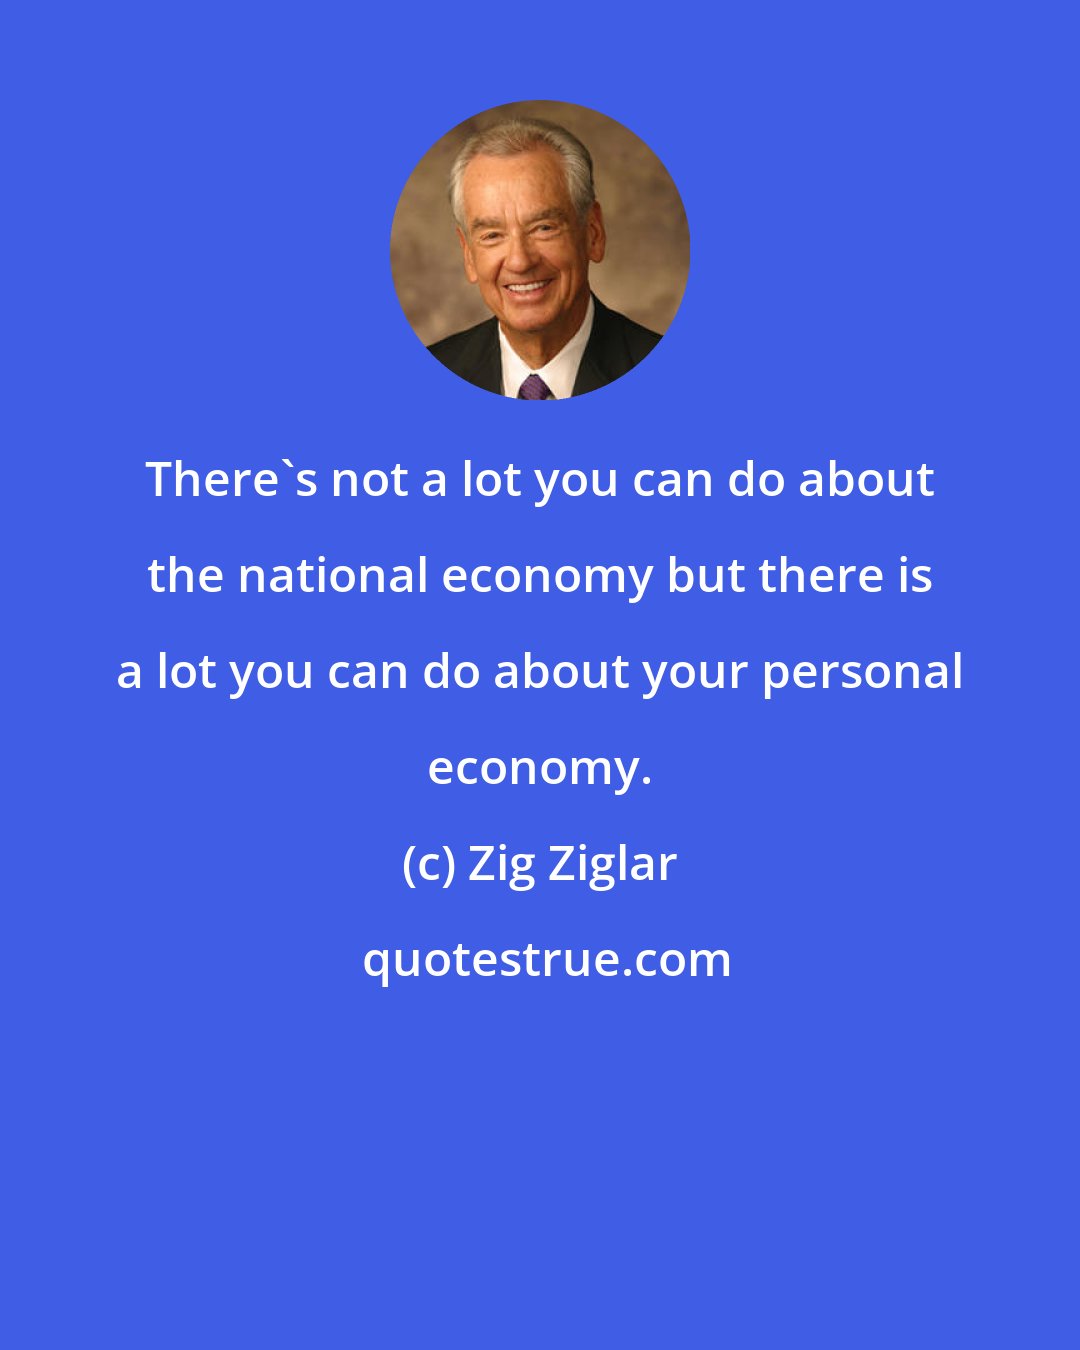 Zig Ziglar: There's not a lot you can do about the national economy but there is a lot you can do about your personal economy.